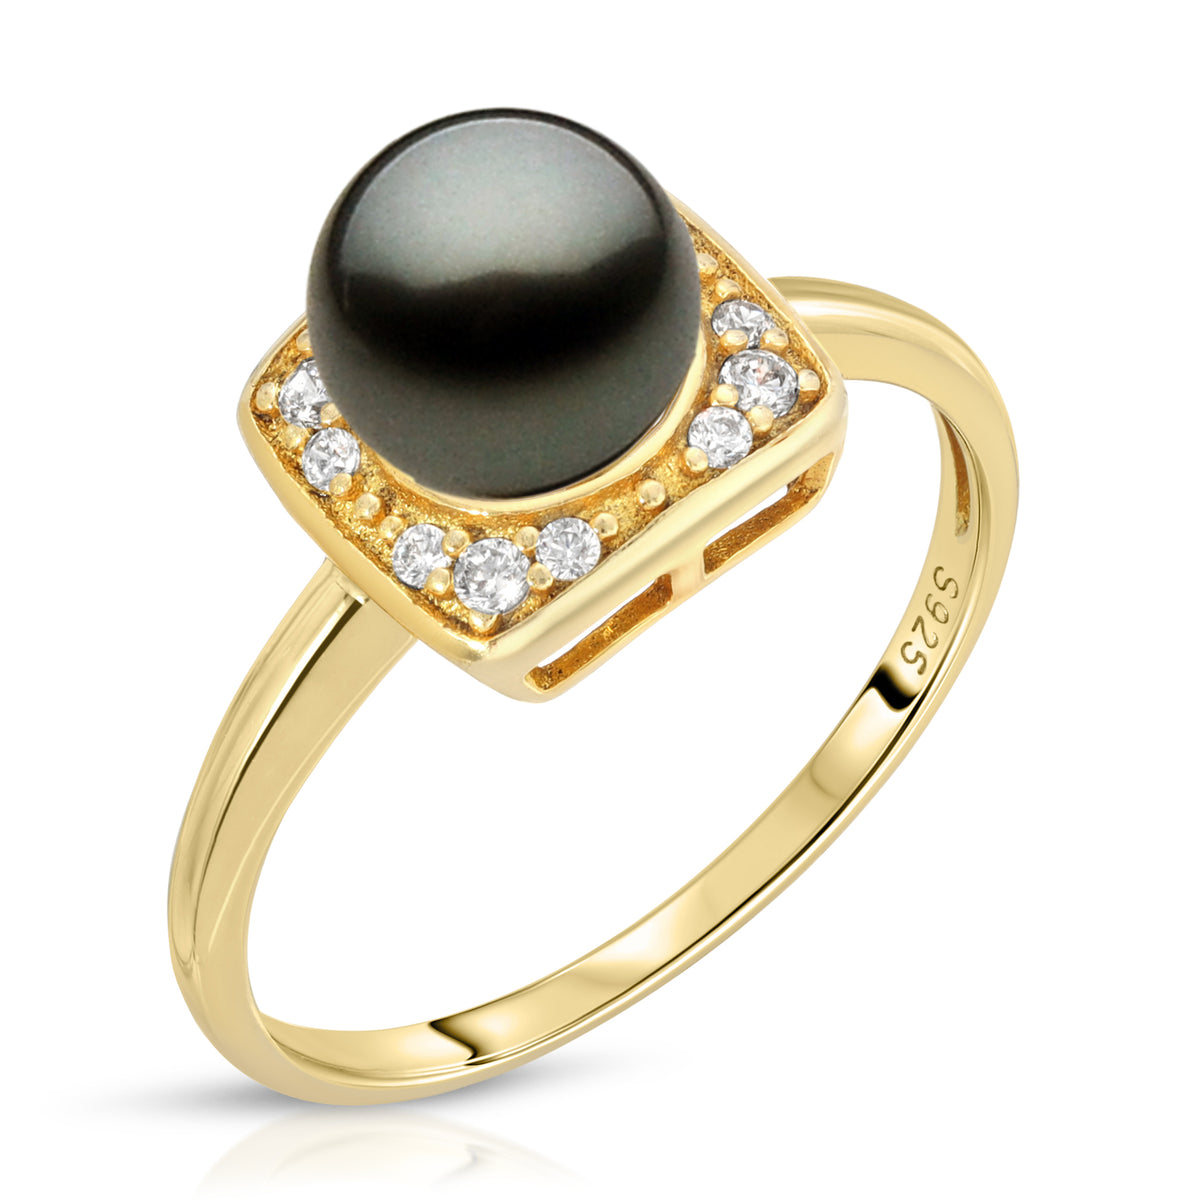 Sterling Silver Timeless Design Pearl Ring